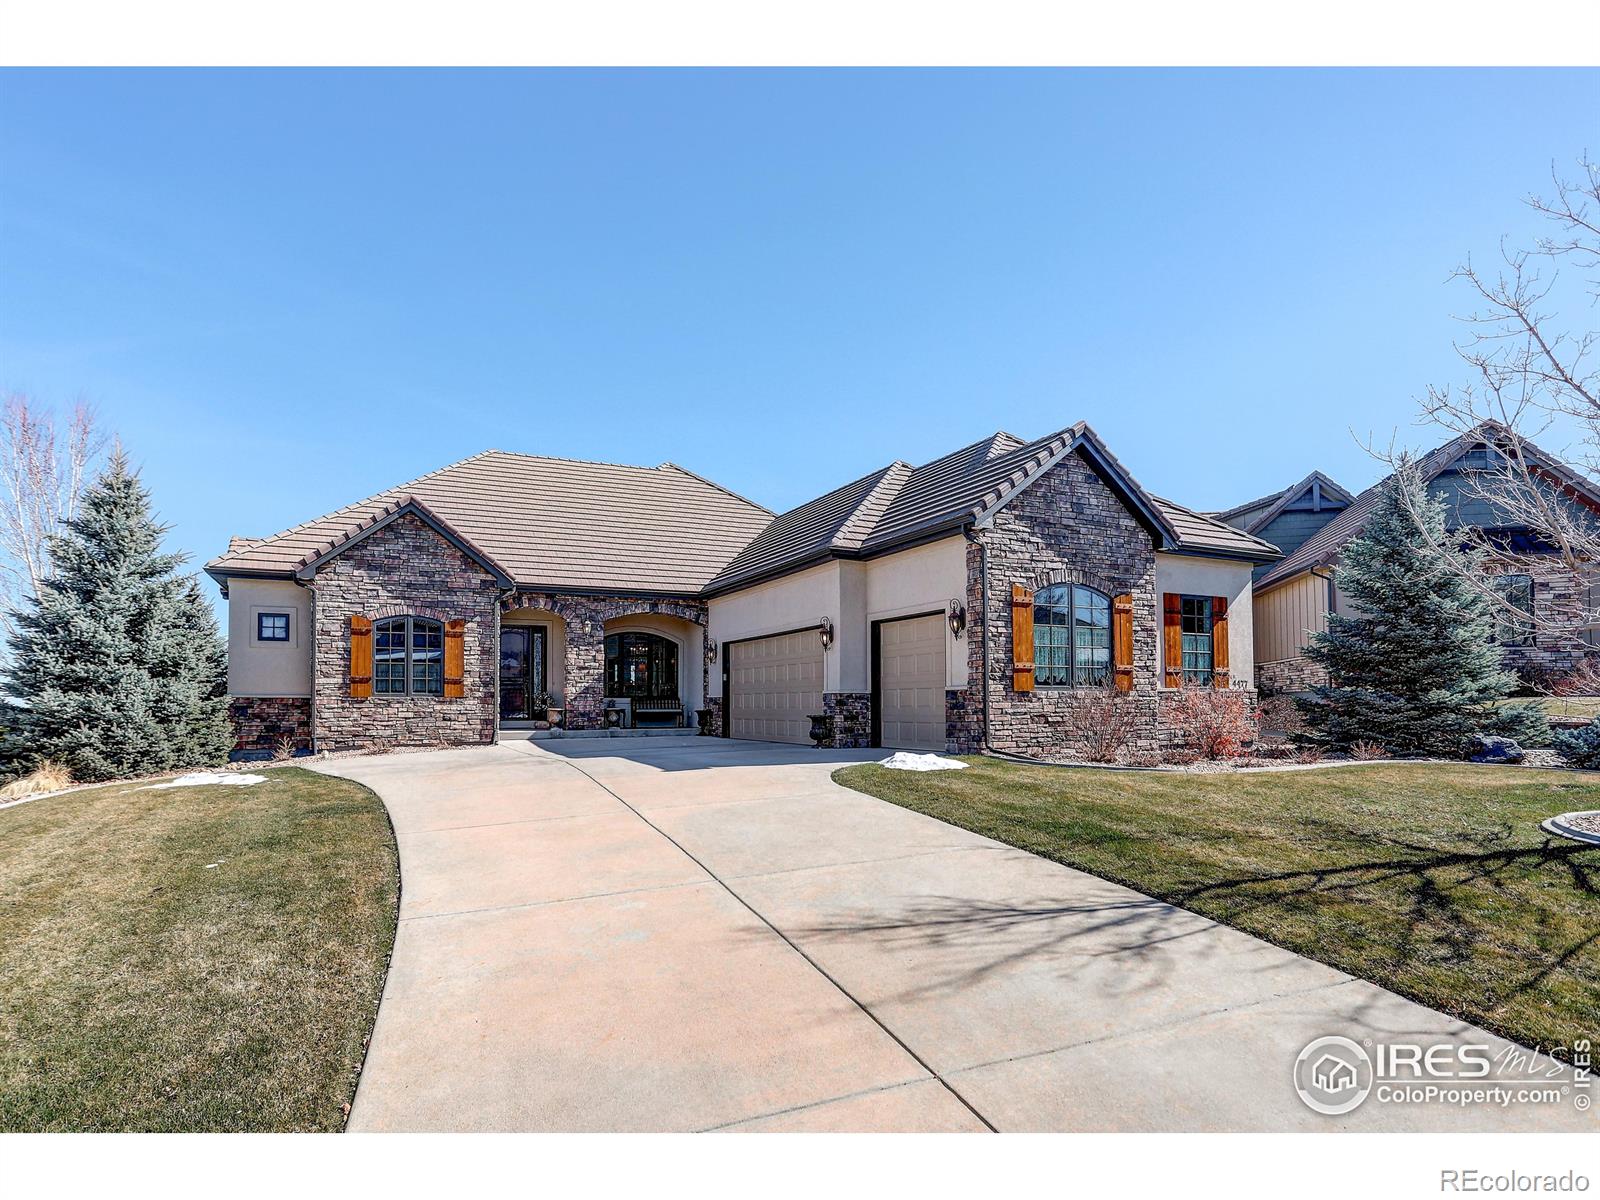 4477 W 105th Way, westminster MLS: 4567891005494 Beds: 5 Baths: 6 Price: $1,295,000